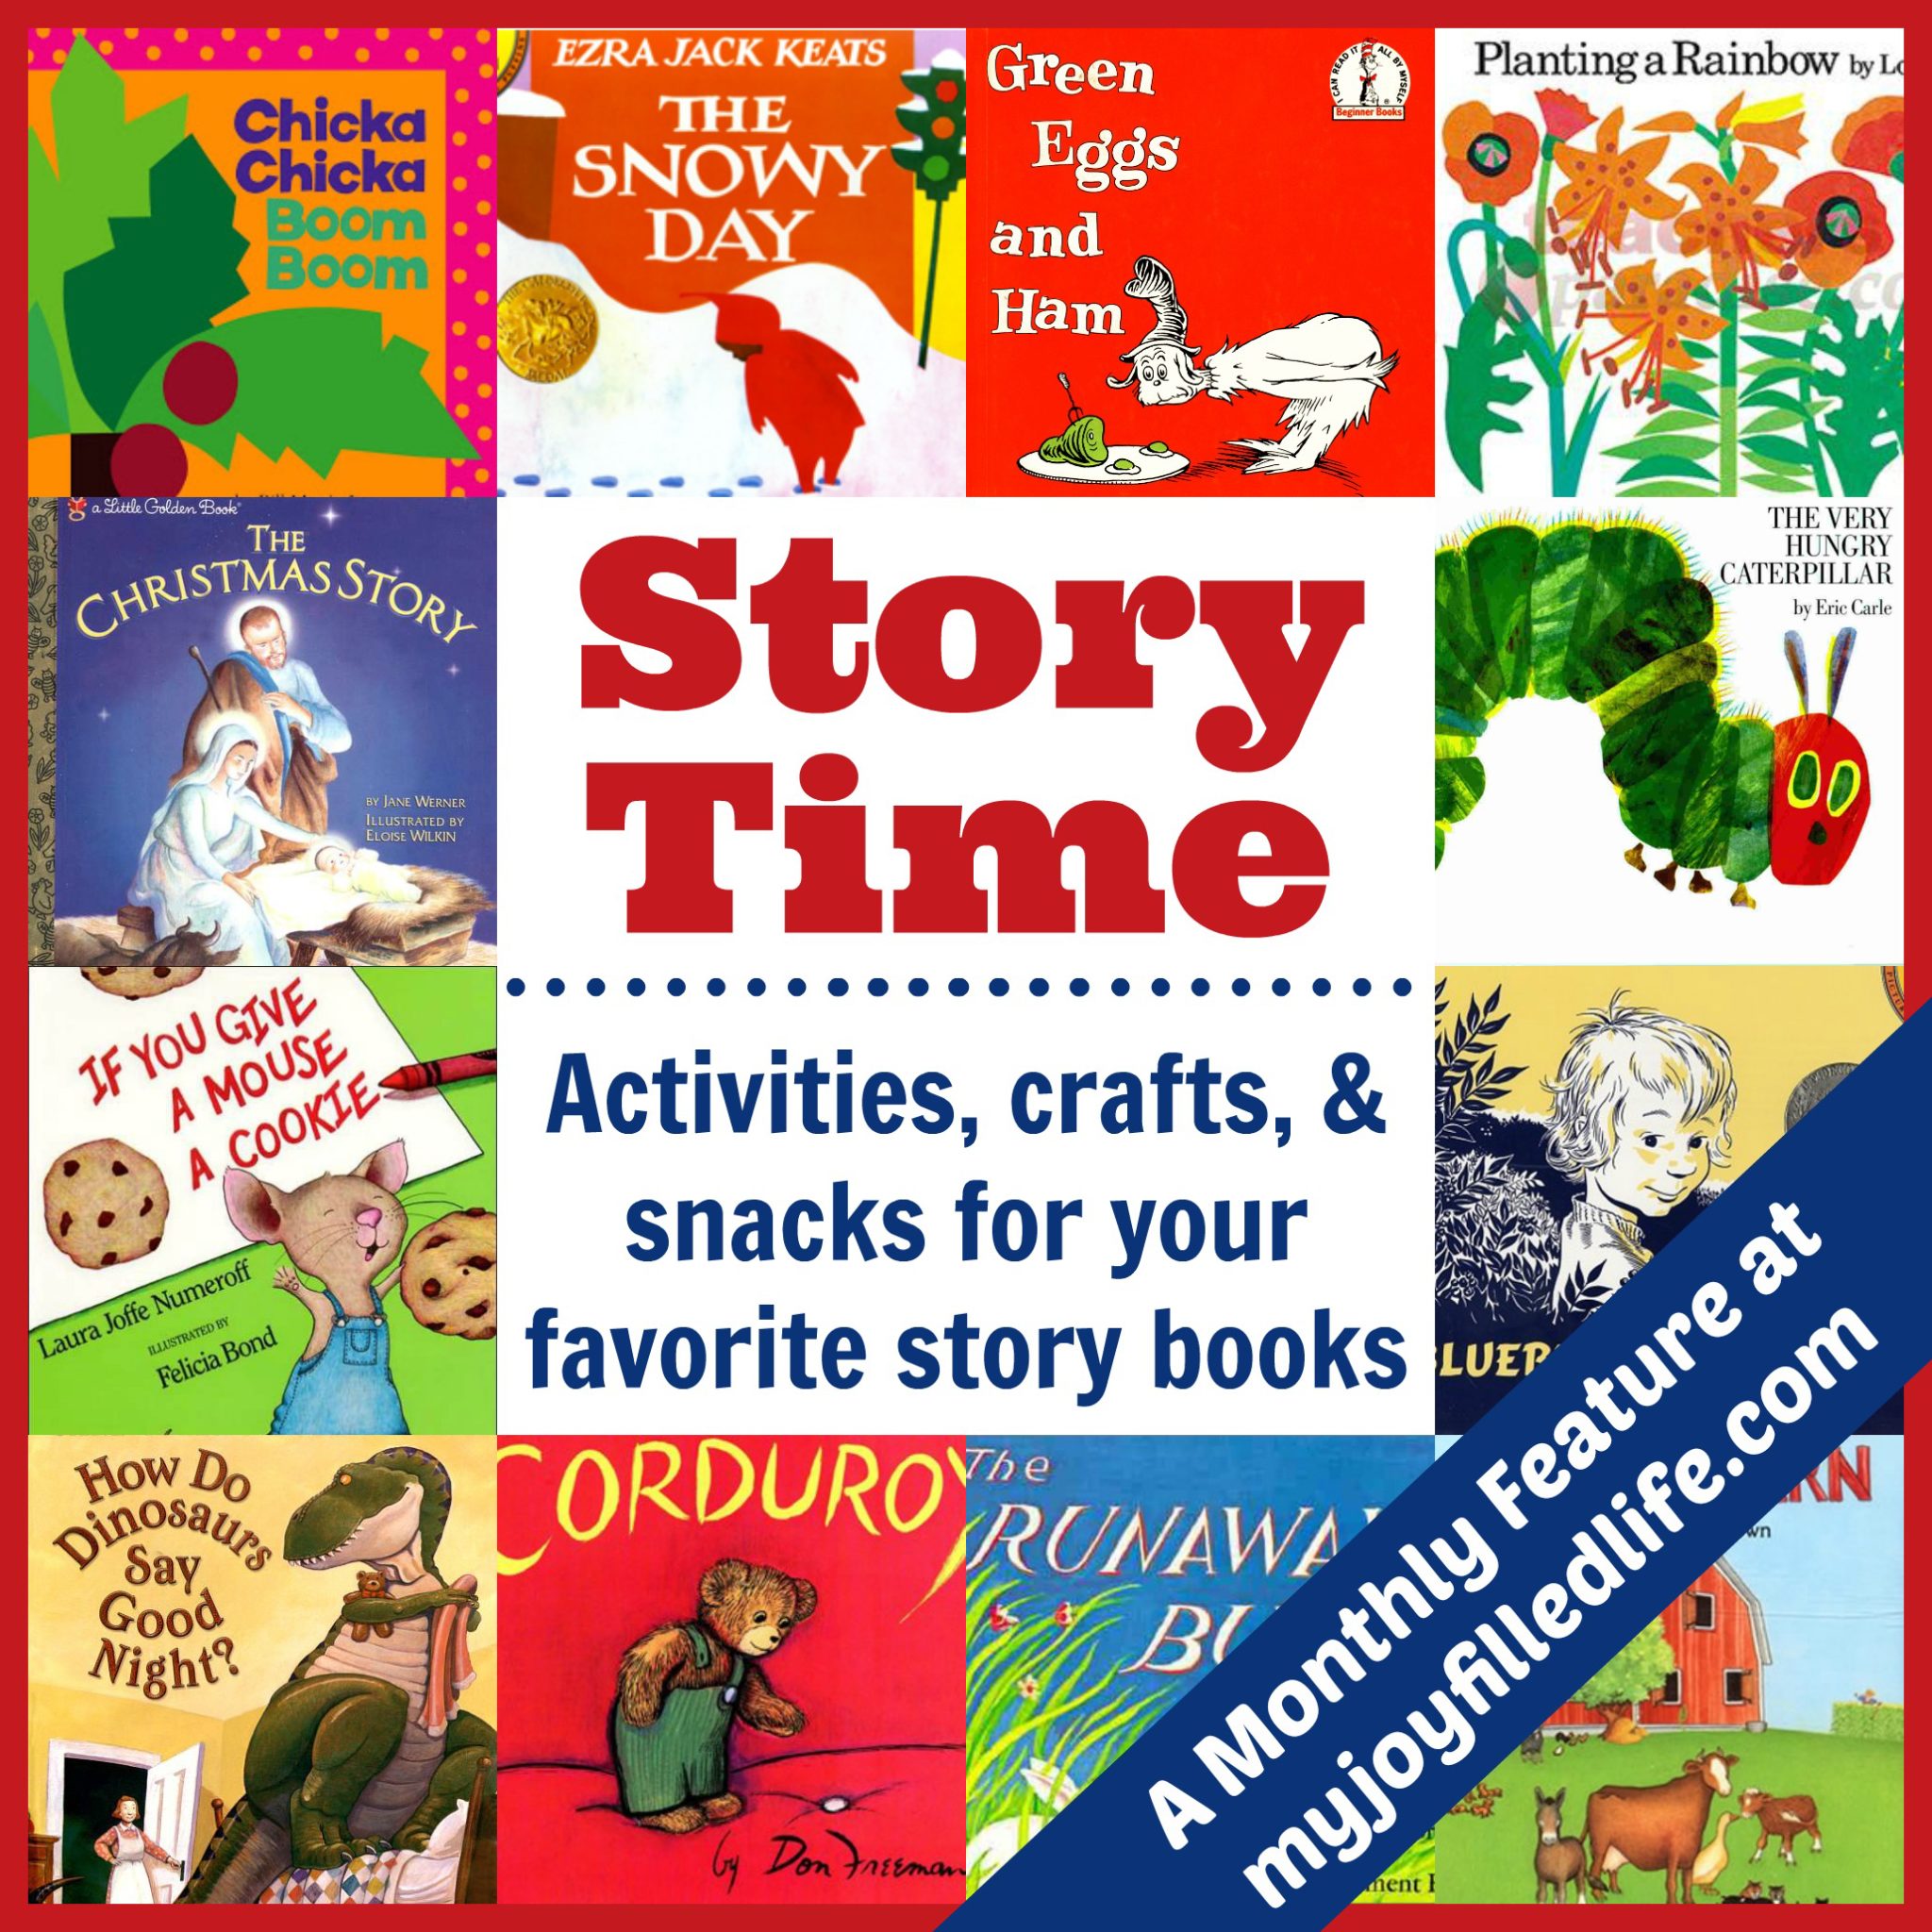 Corduroy Story Time Activities My Joy Filled Life